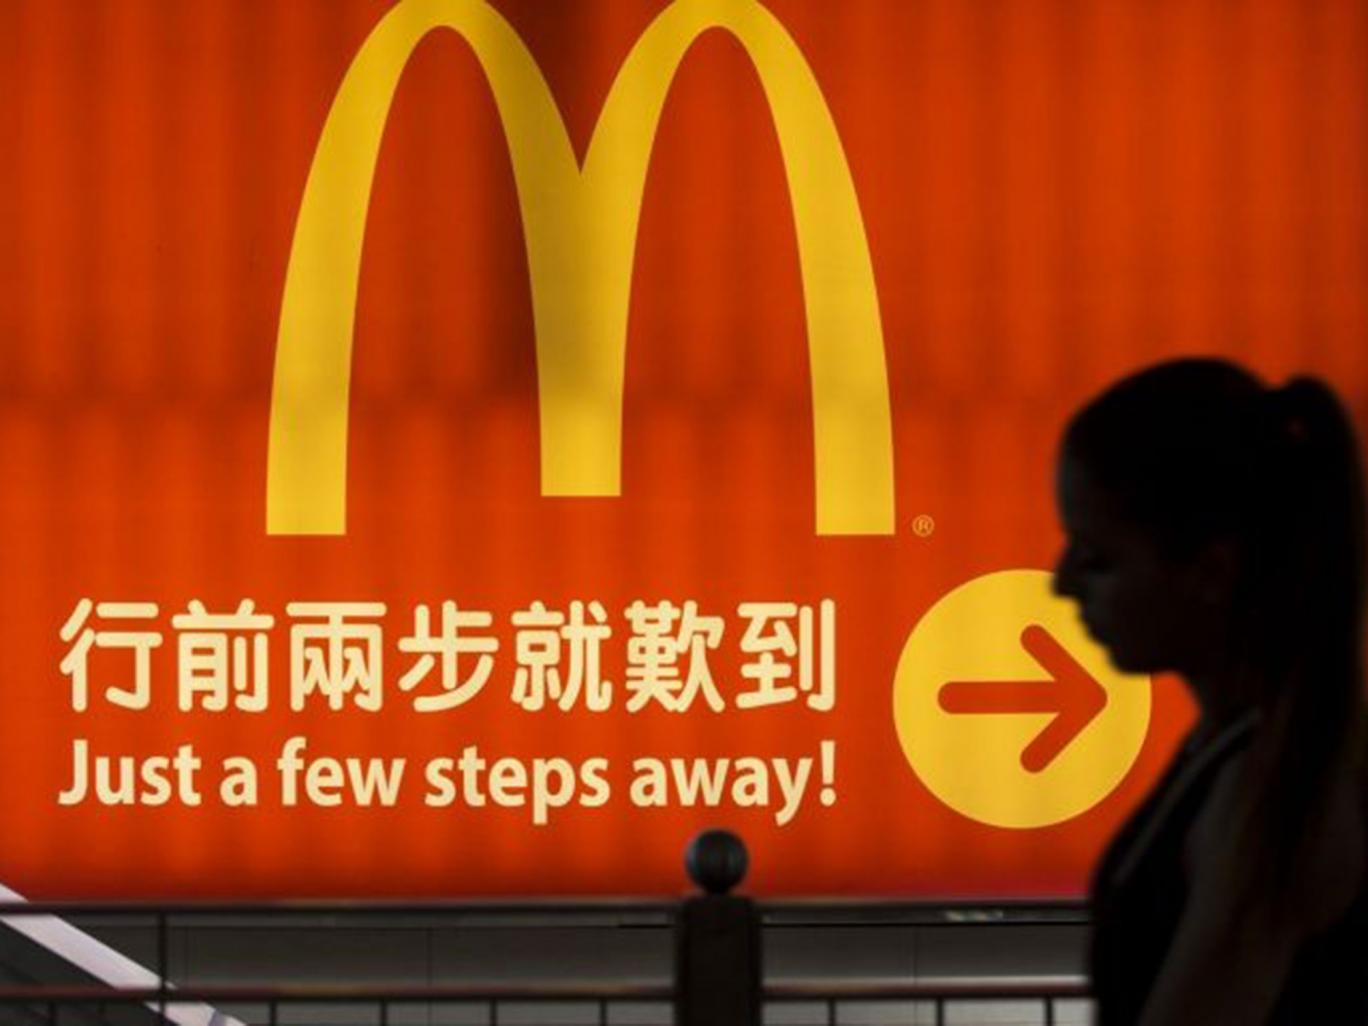 The woman was found in a branch of McDonald's in Hong Kong